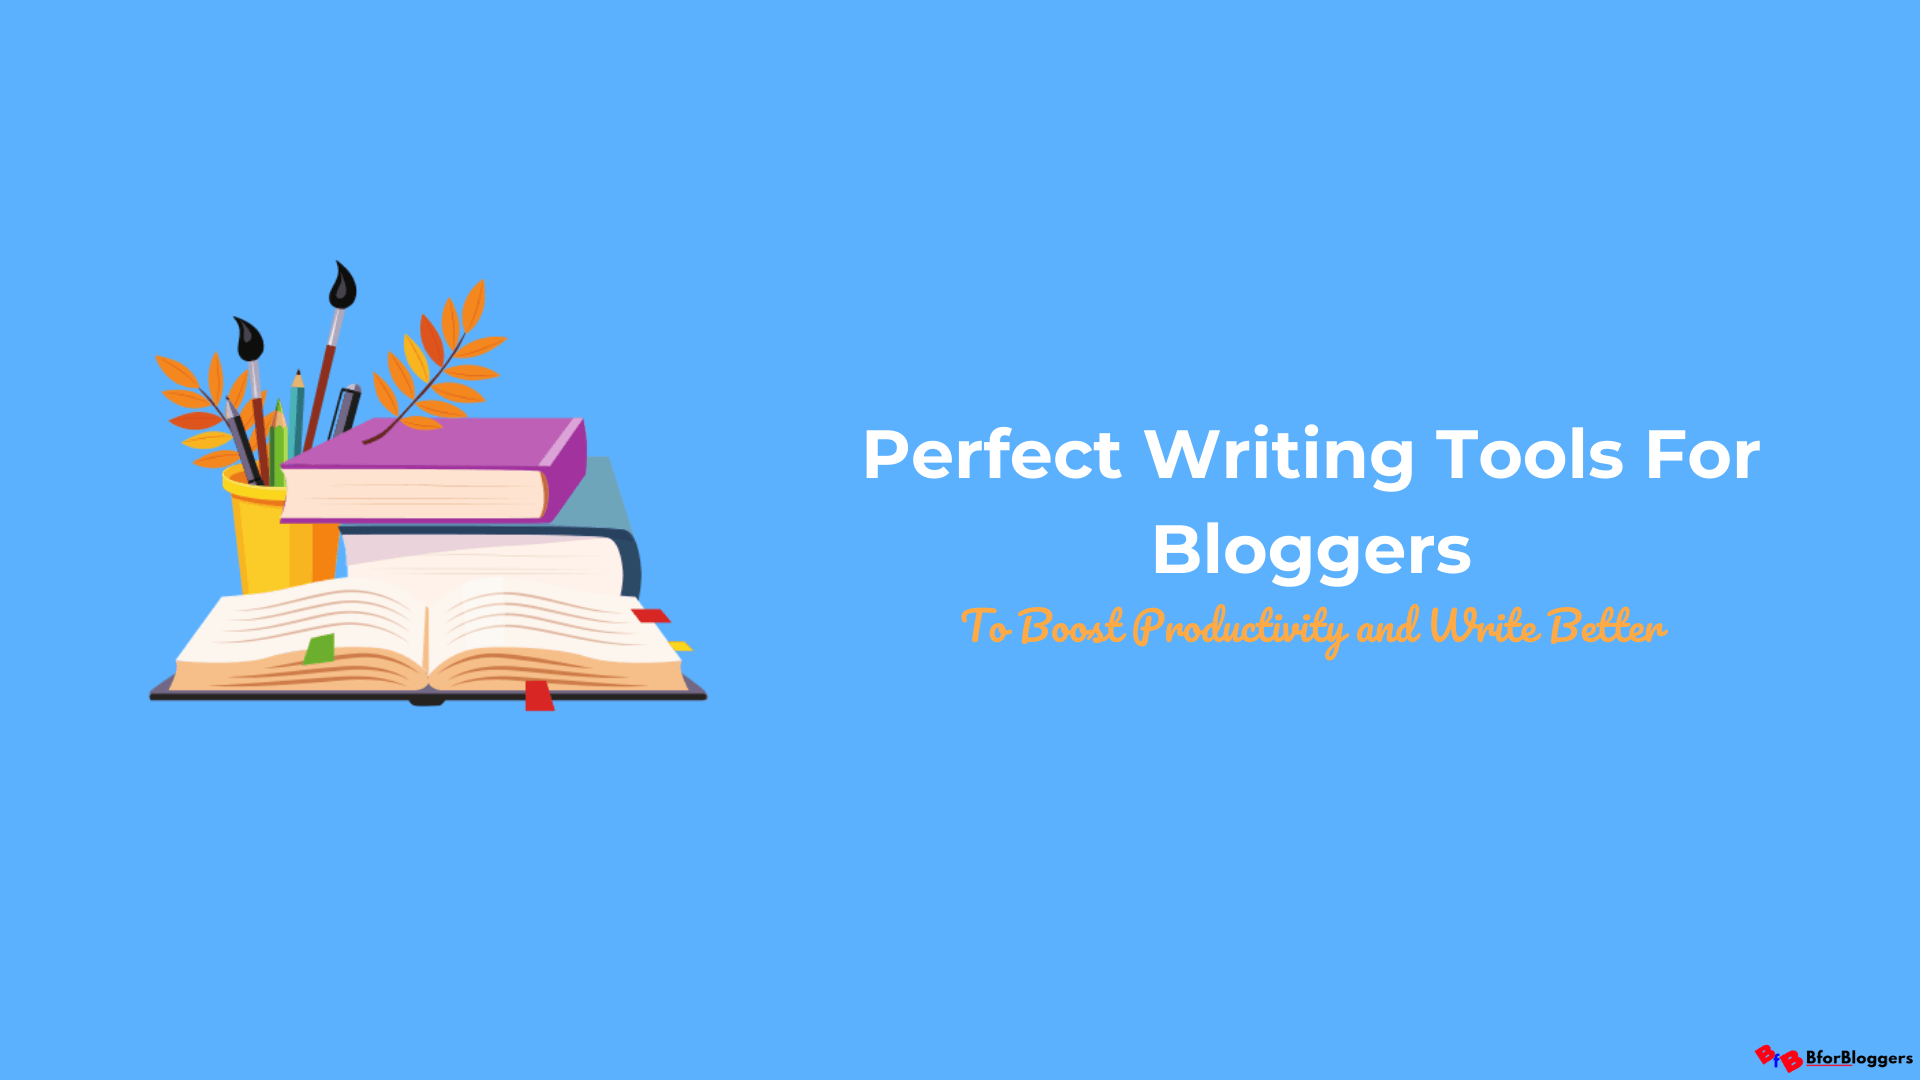 14 Powerful Content Writing Tools For Bloggers